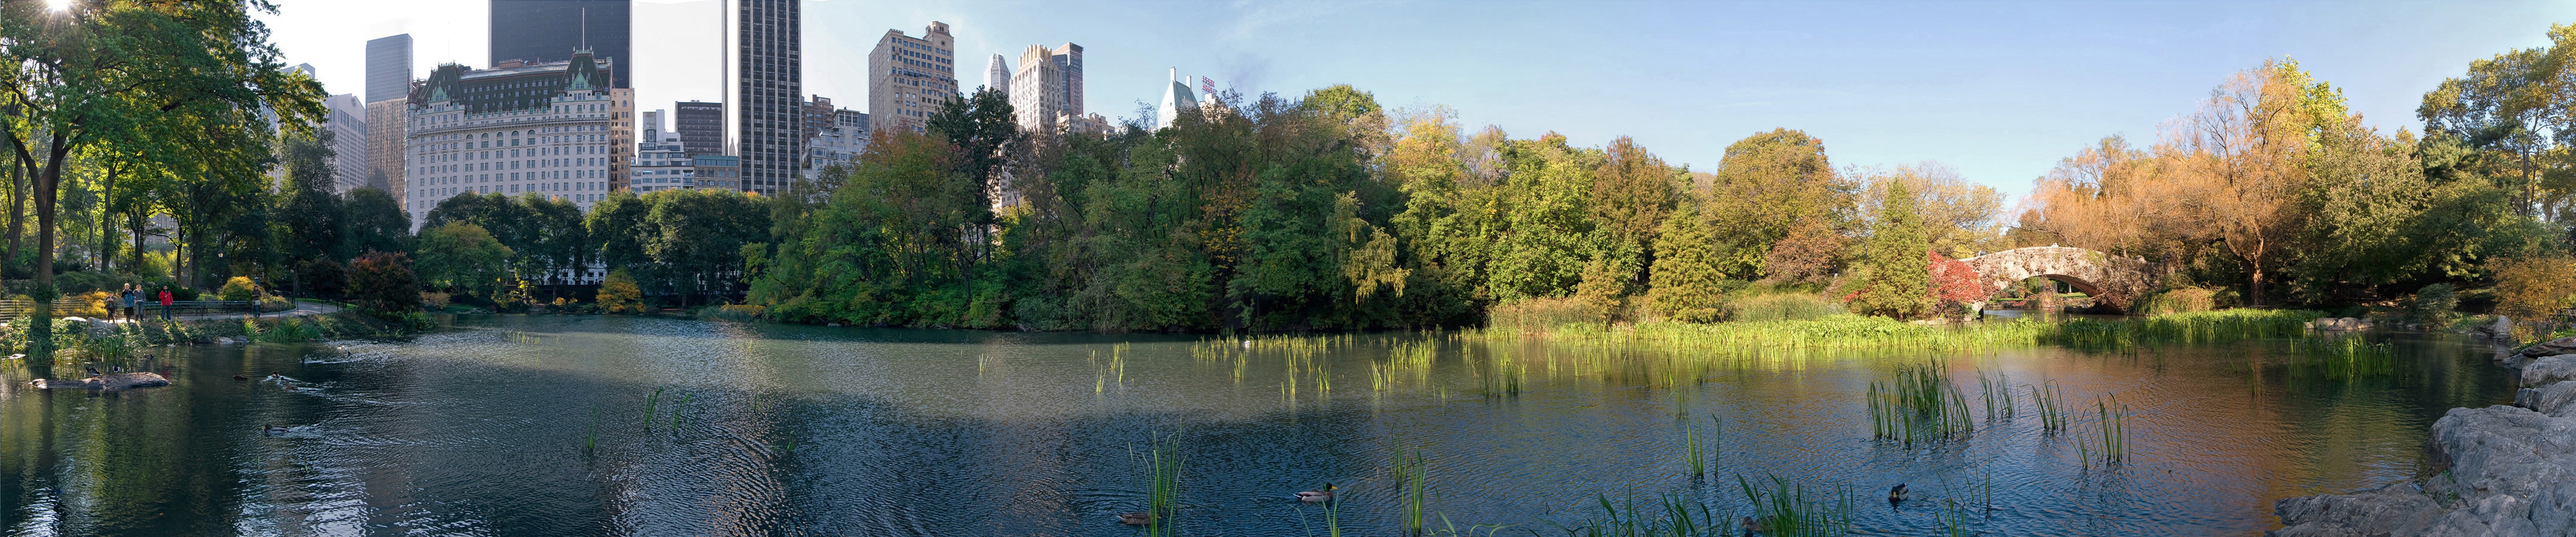 General 5760x1200 New York City triple screen lake wide angle Central Park Manhattan panorama cityscape park USA water plants